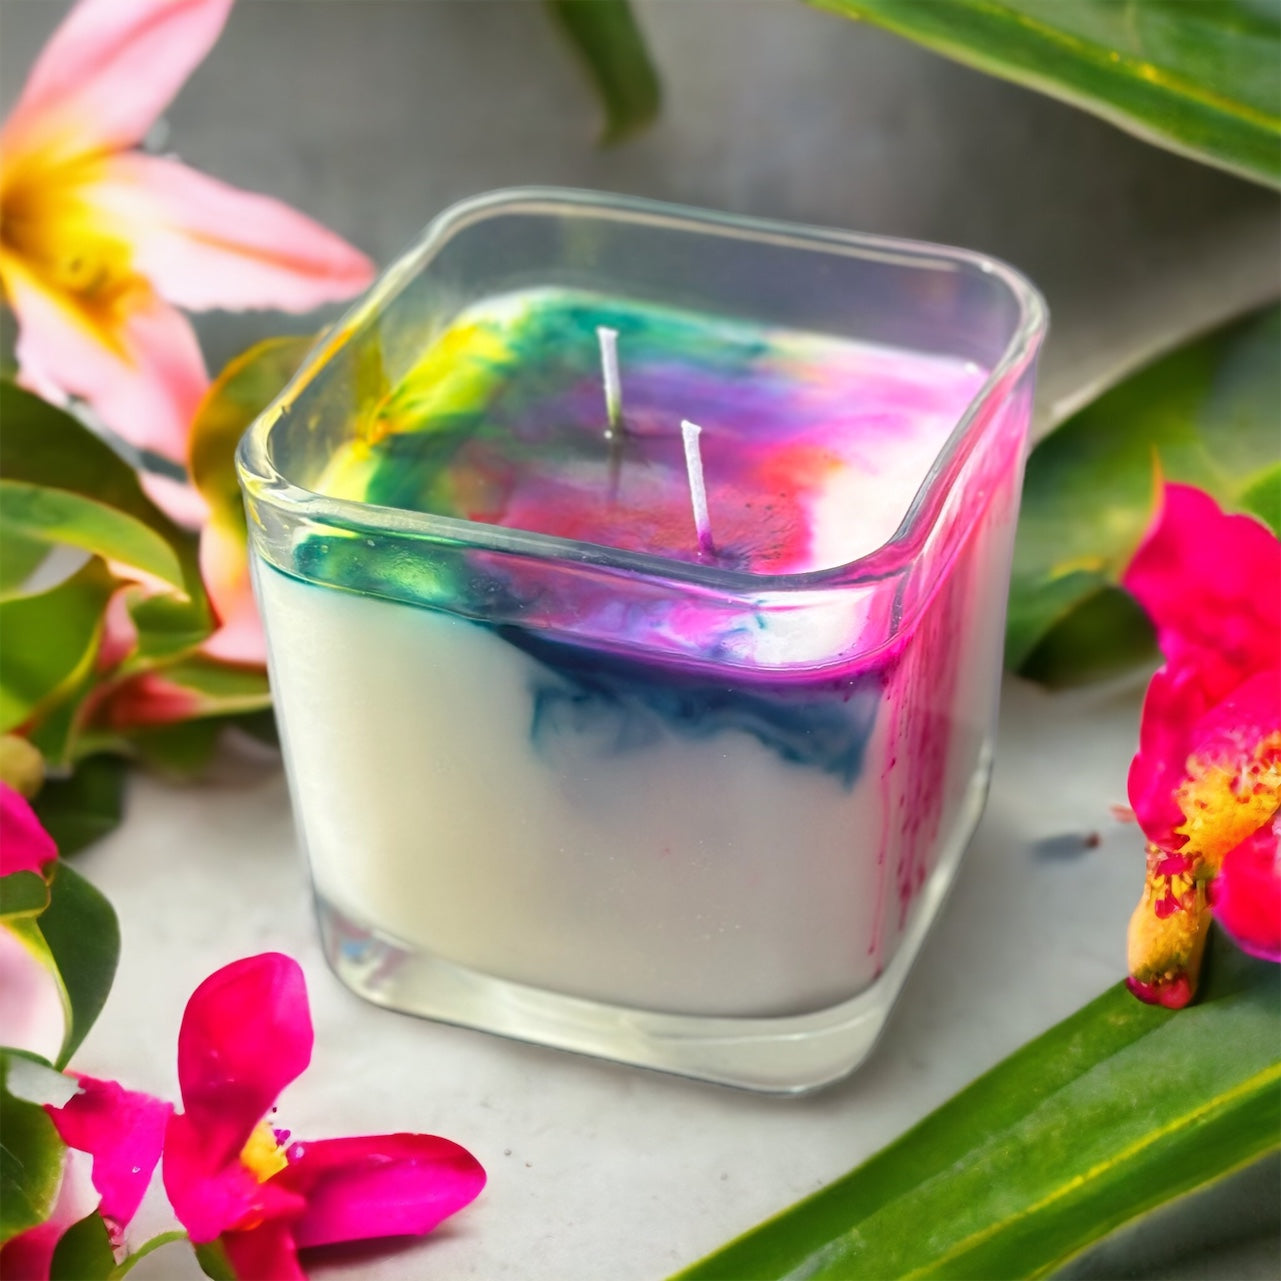 Bird of Paradise Triple Scented Candle side view 1 Colorful with flowers